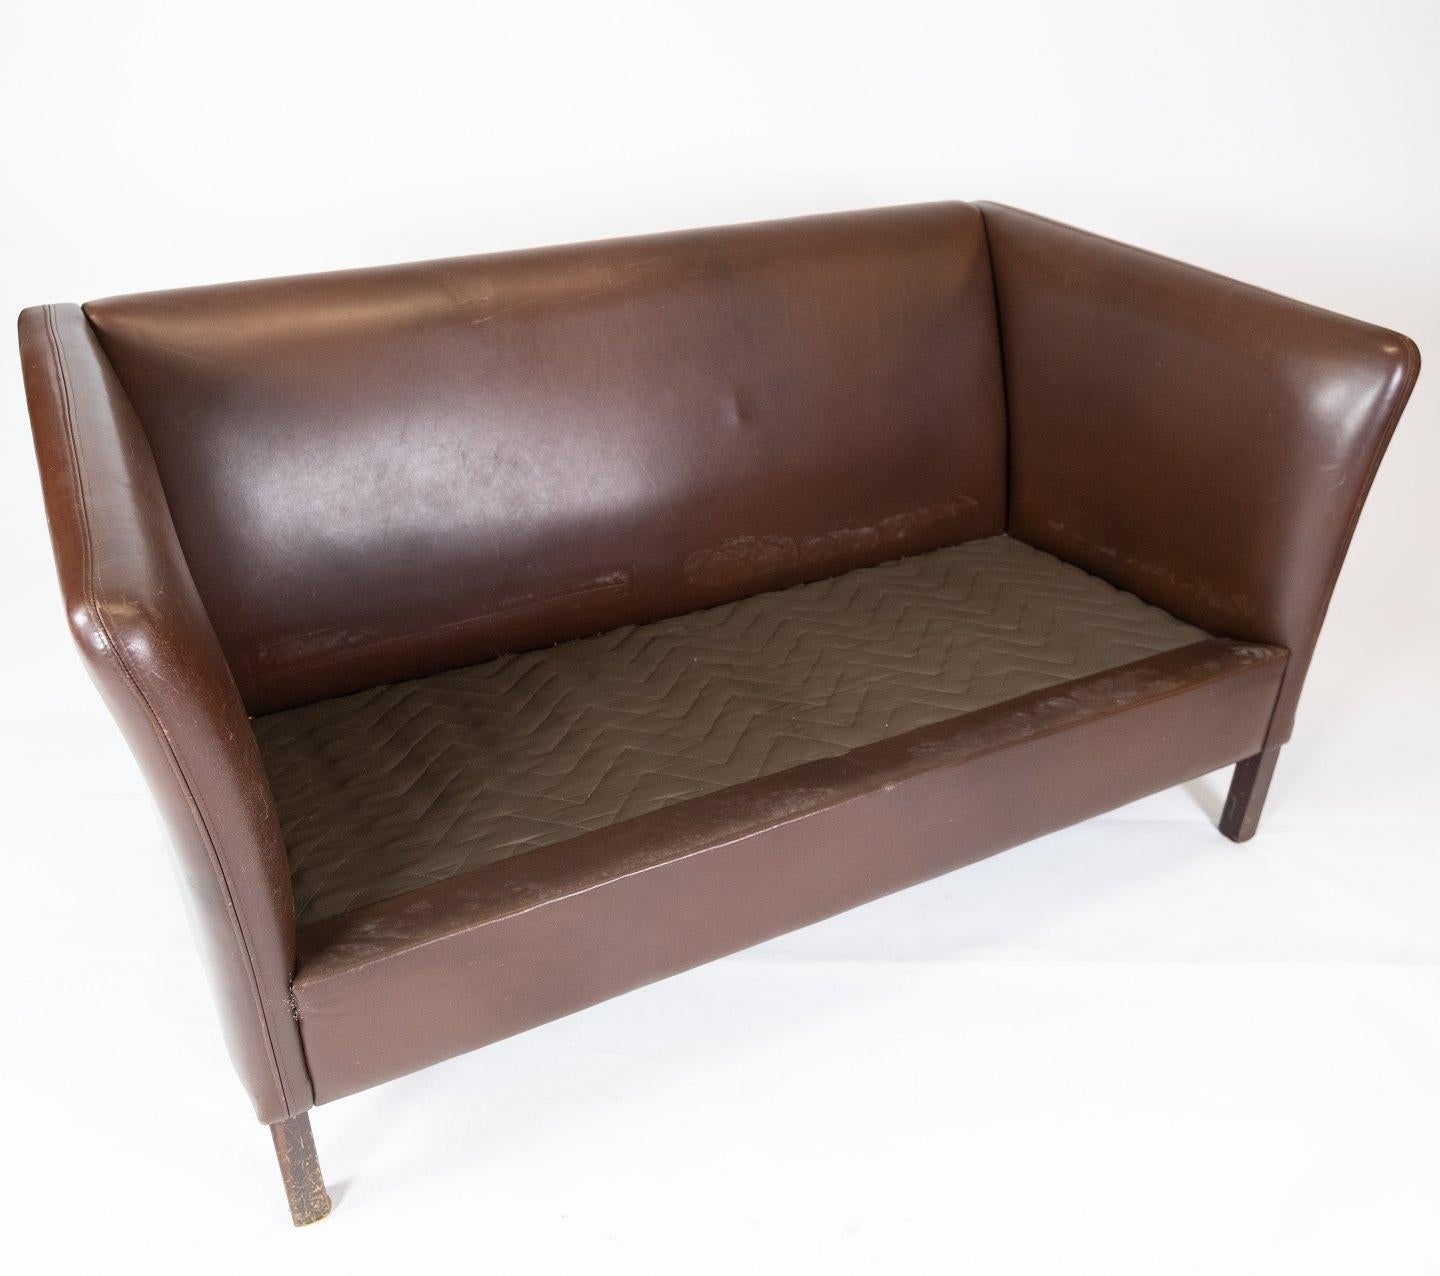 Two Seater Sofa Upholstered with Dark Brown Leather of Danish Design, 1960s In Good Condition For Sale In Lejre, DK